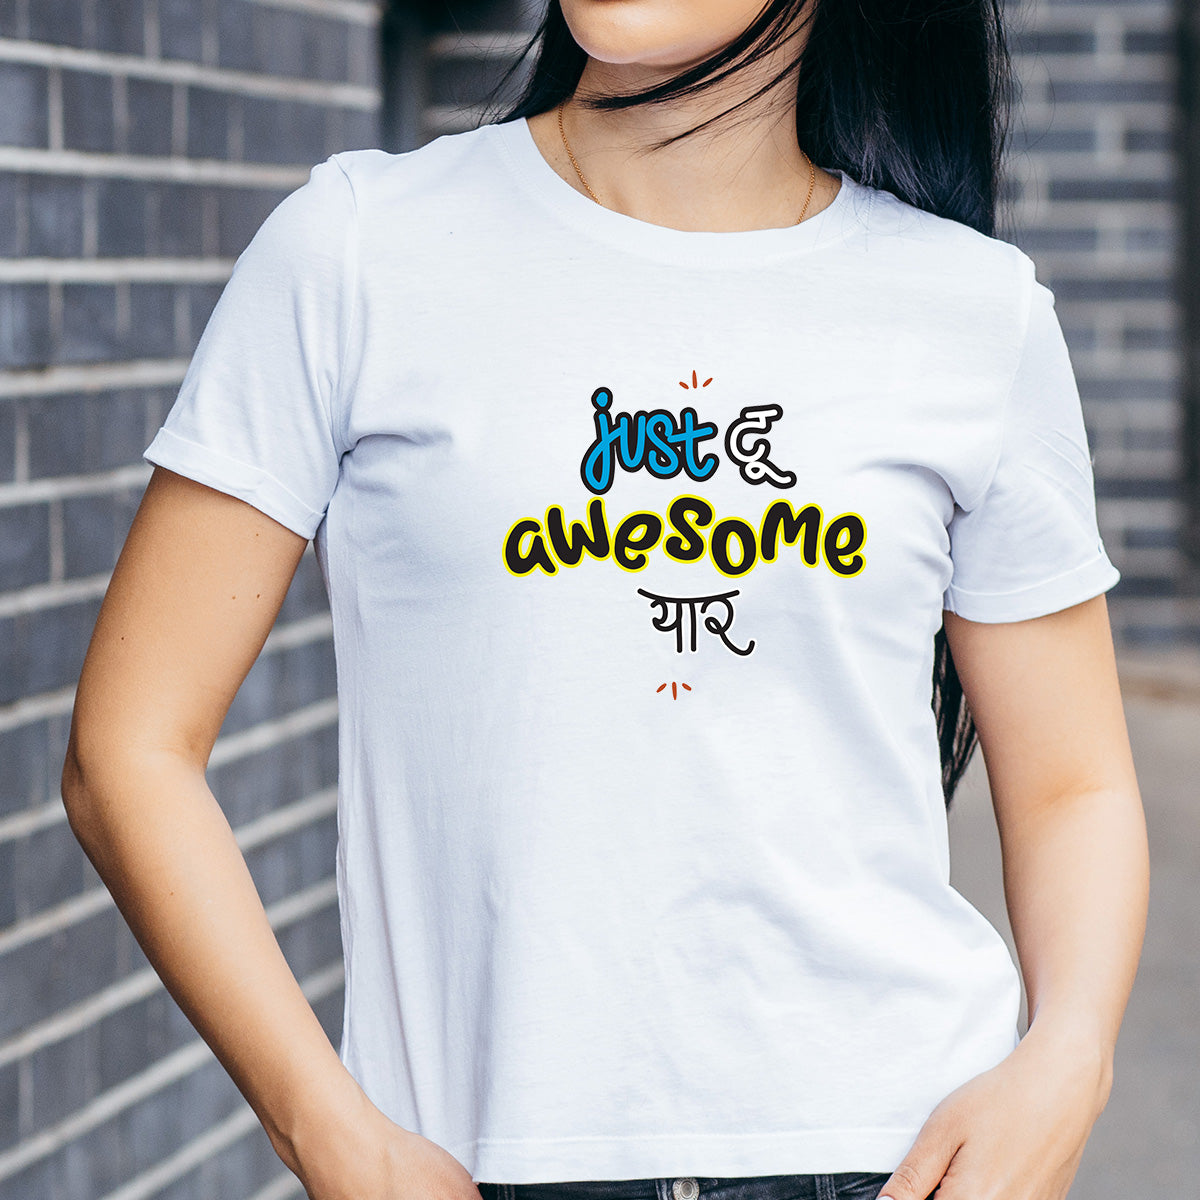 Just Too Awesome Yaar - Printed Cotton T- Shirt - White